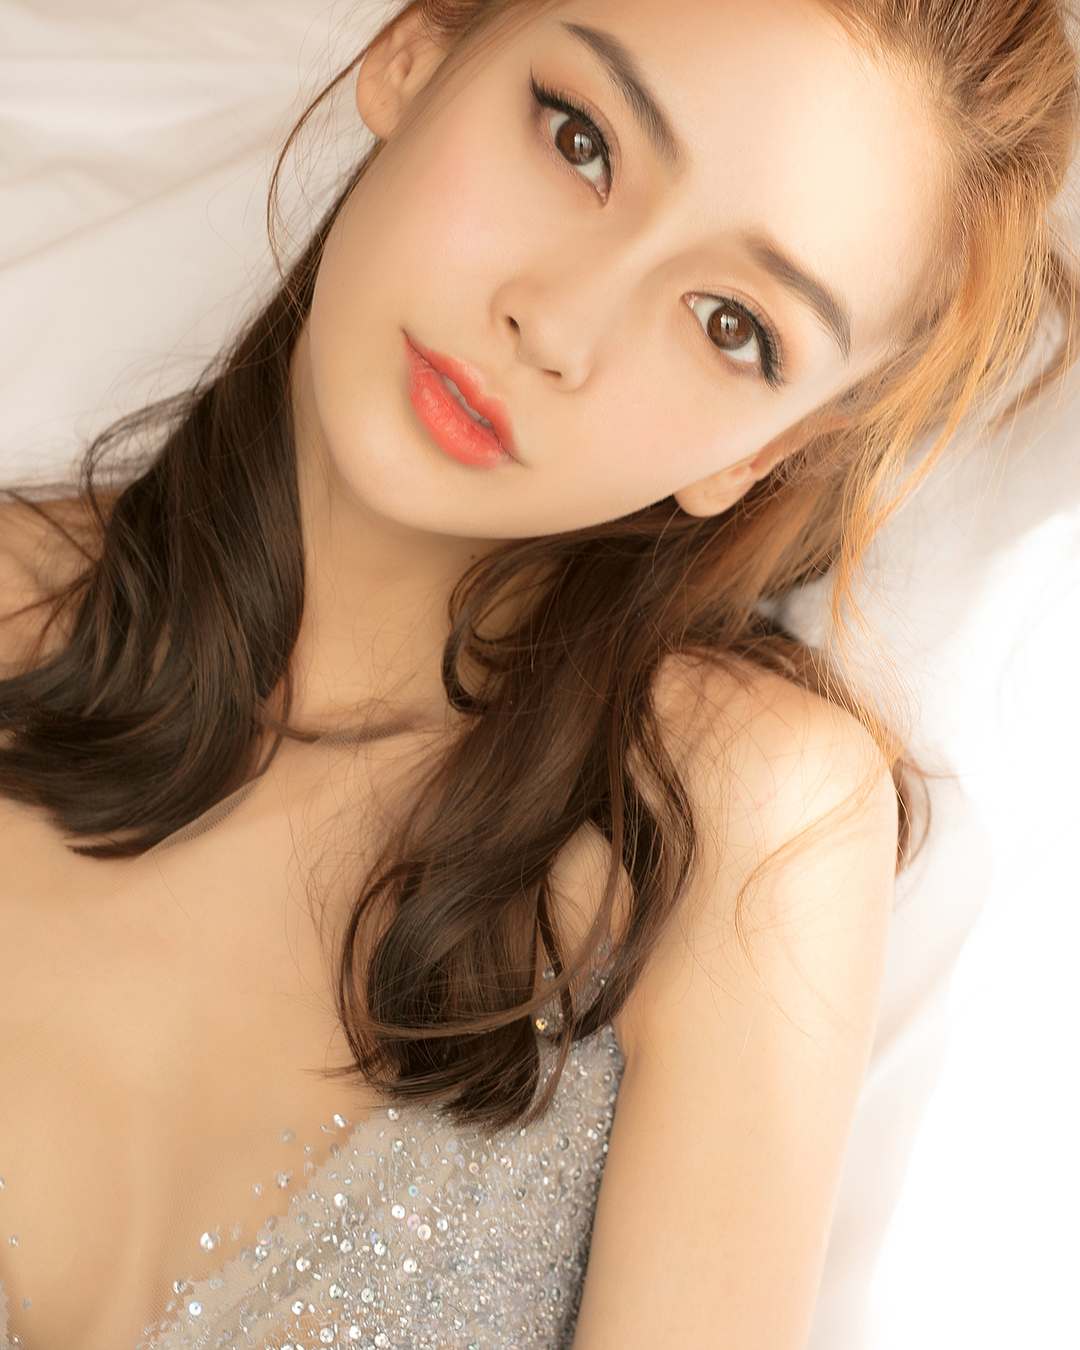 Angelababy - Biography, Profile, Facts, and Career